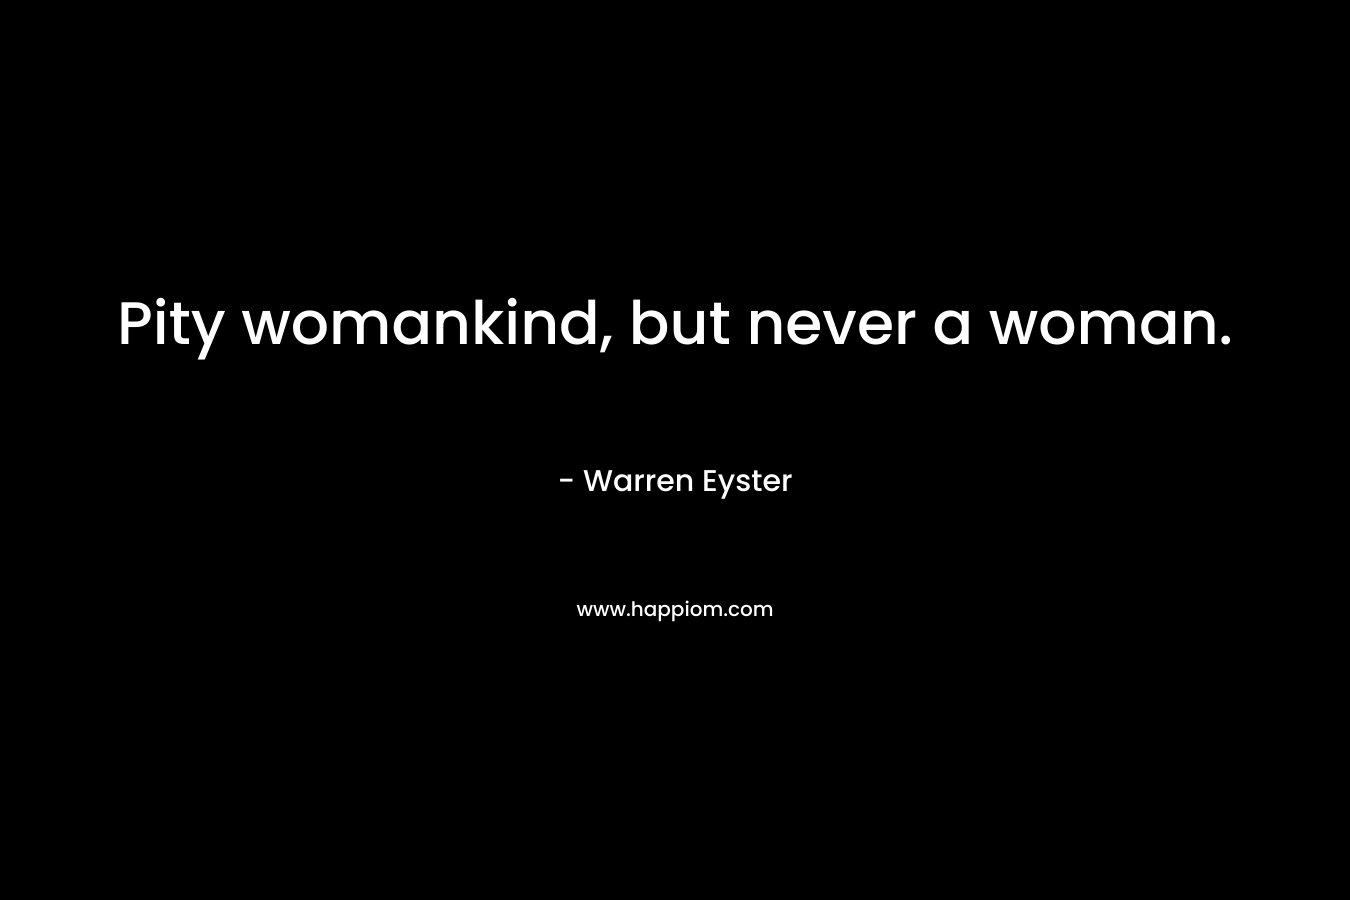 Pity womankind, but never a woman.